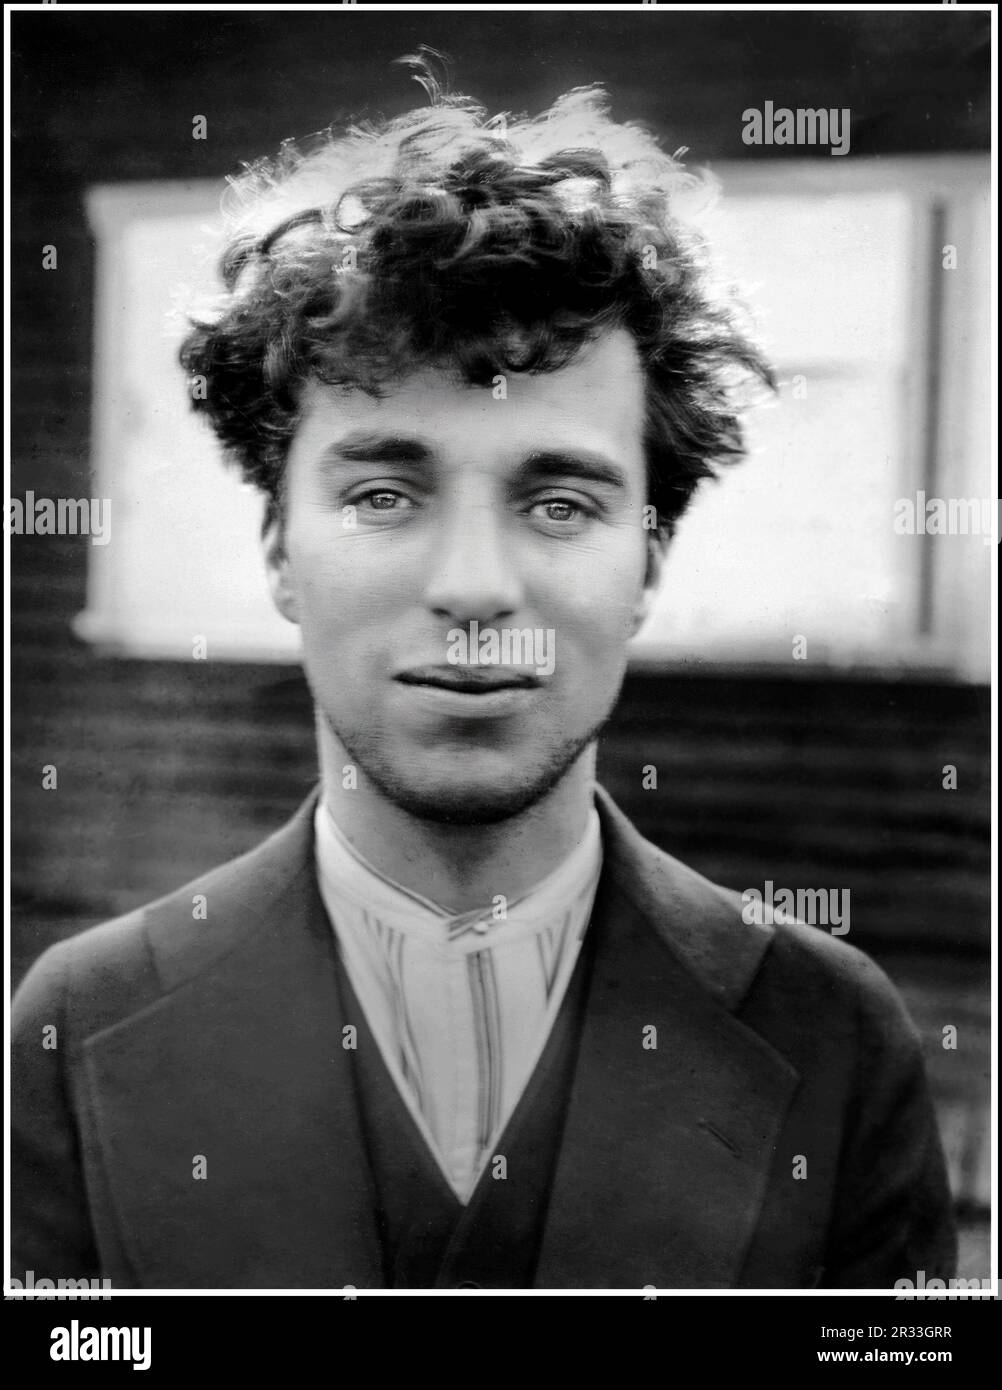 Charlie Chaplin 1900s Film Actor informal reportage restored B&W portrait outside outdoors as a young man taken around 1916 Stock Photo